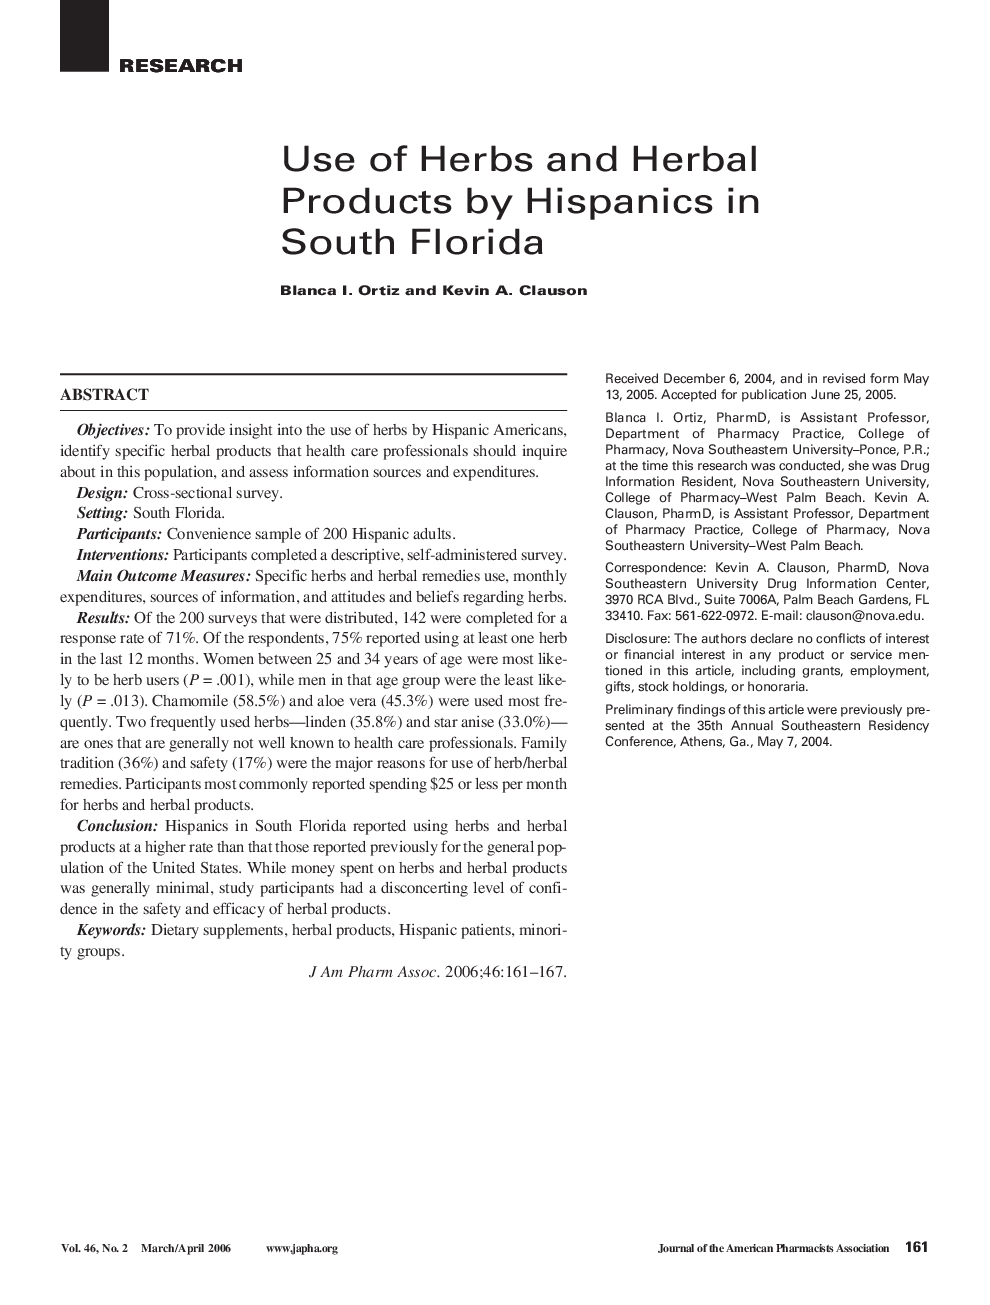 Use of Herbs and Herbal Products by Hispanics in South Florida